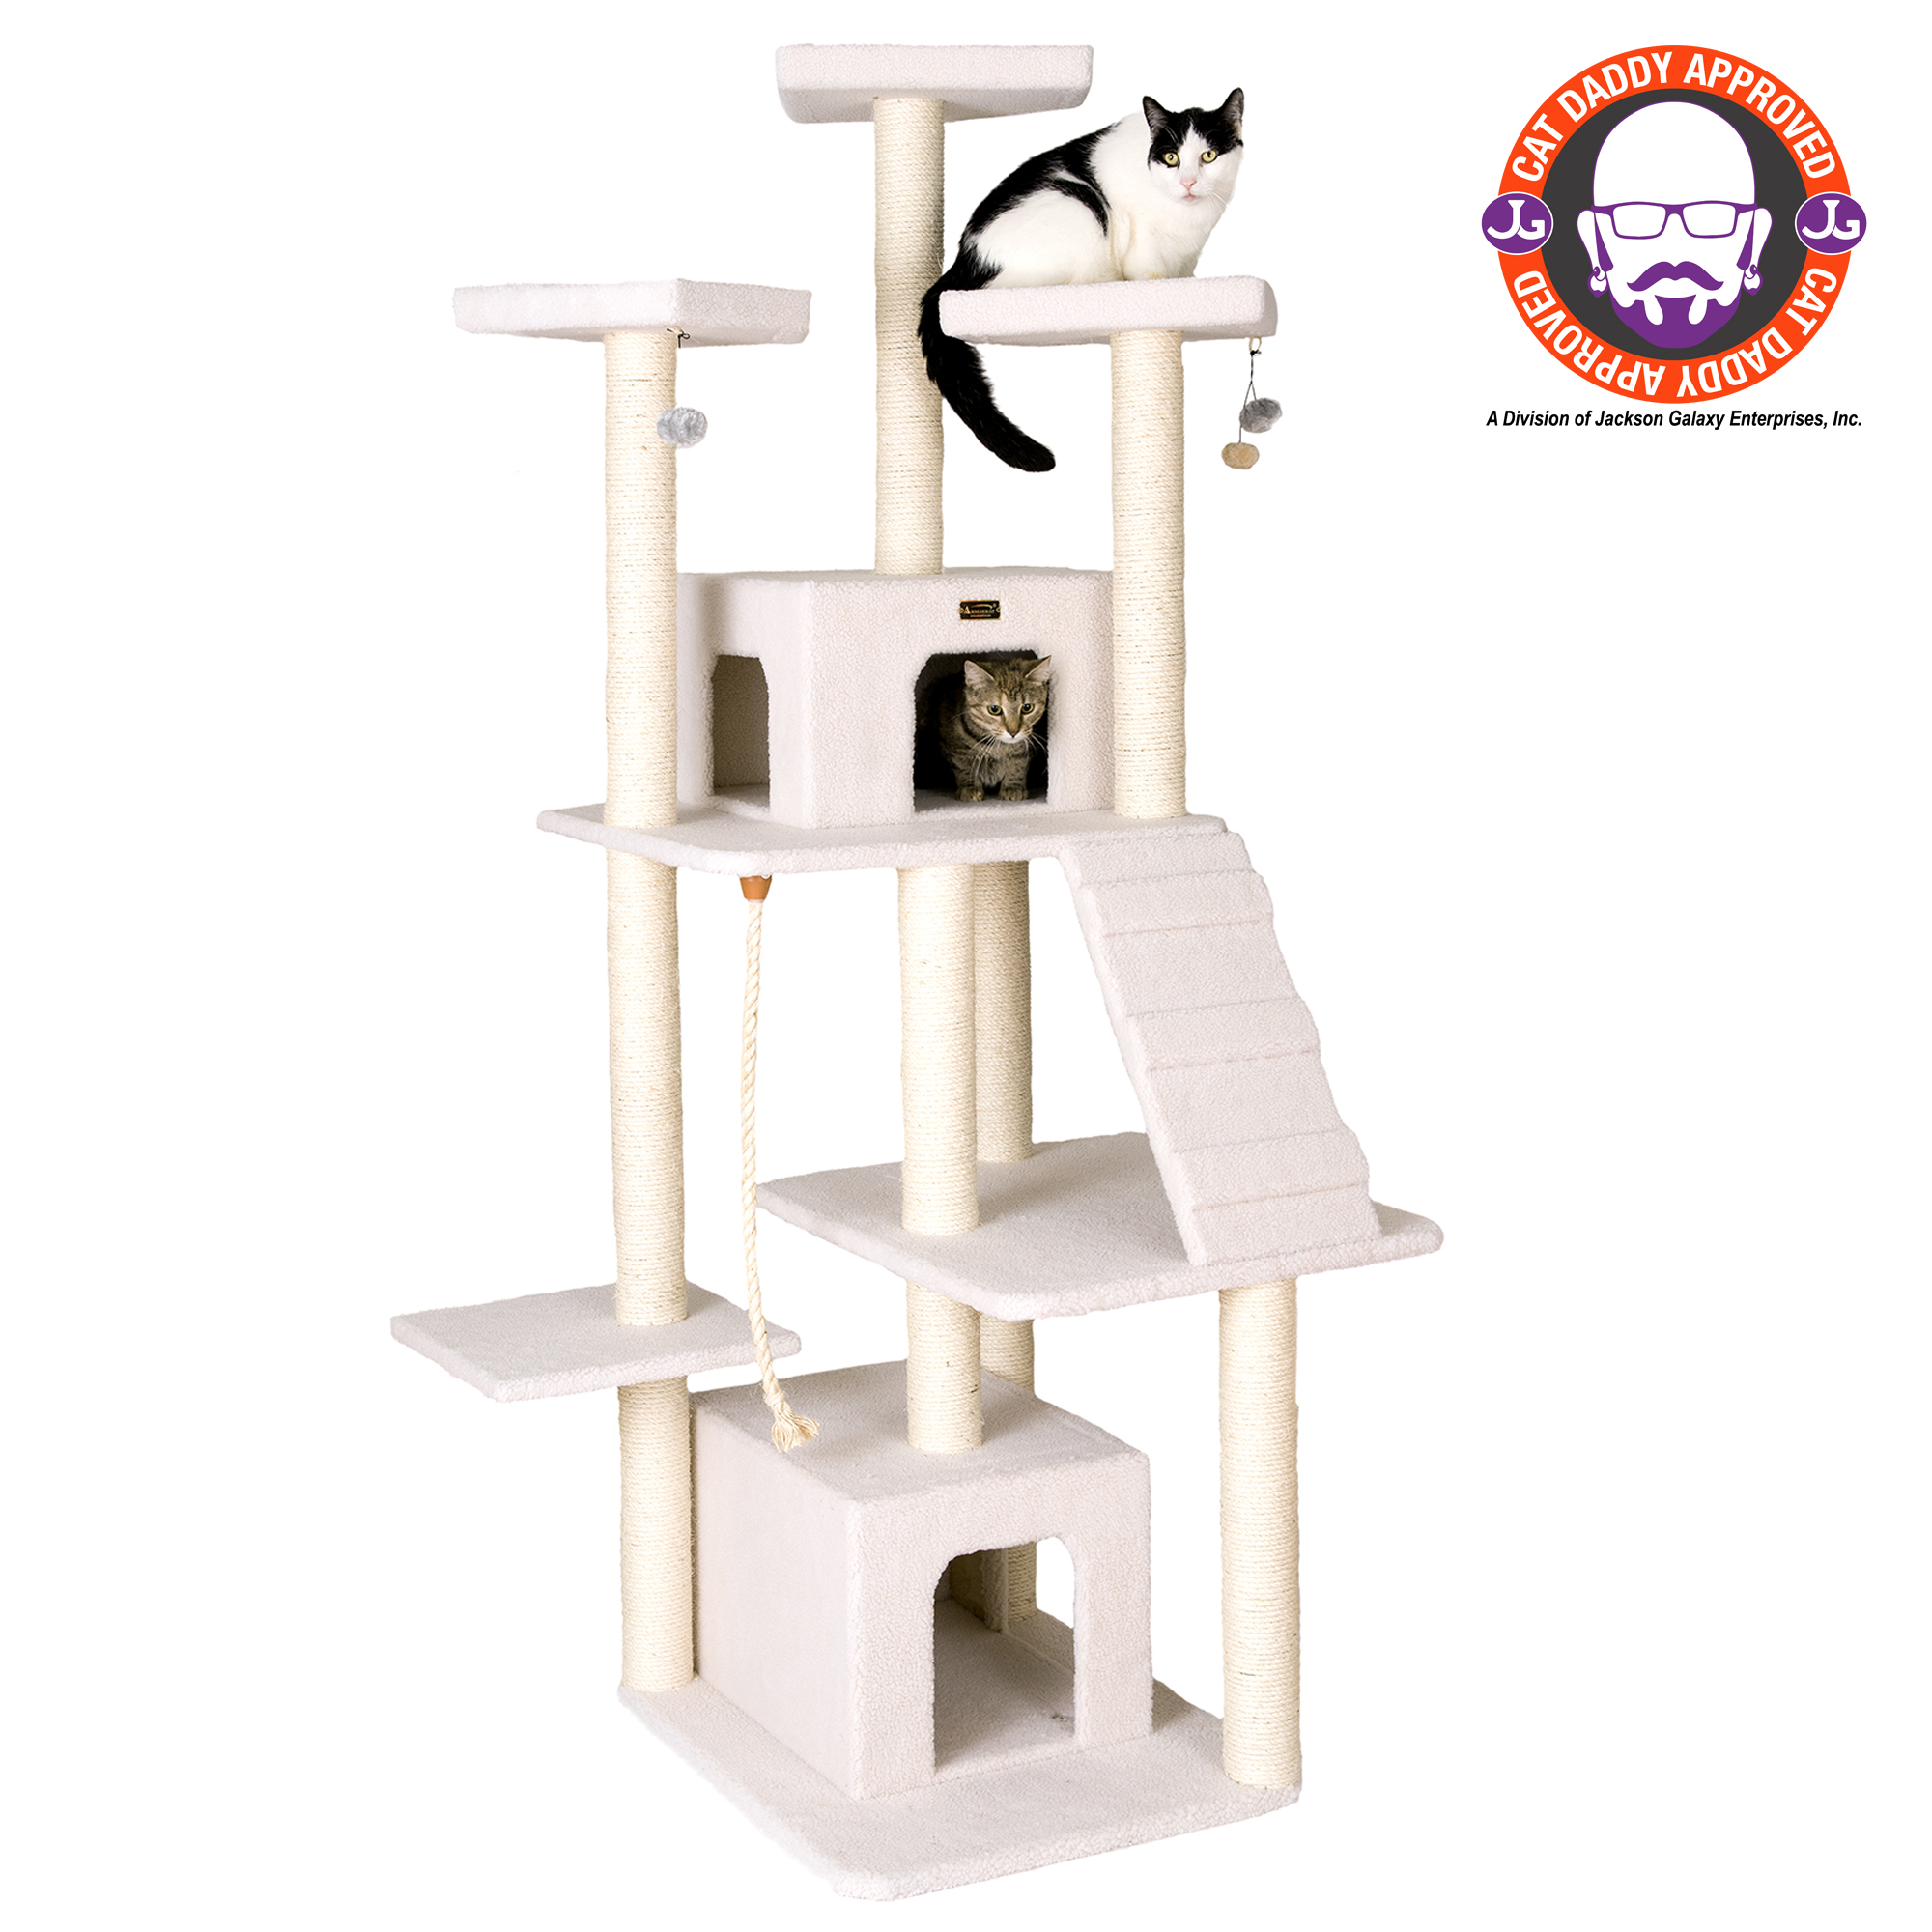 Picture of Armarkat B8201 Classic Real Wood Cat Tree In Ivory  Jackson Galaxy Approved  Multi Levels With Ramp  Three Perches  Rope Swing  Two Condos